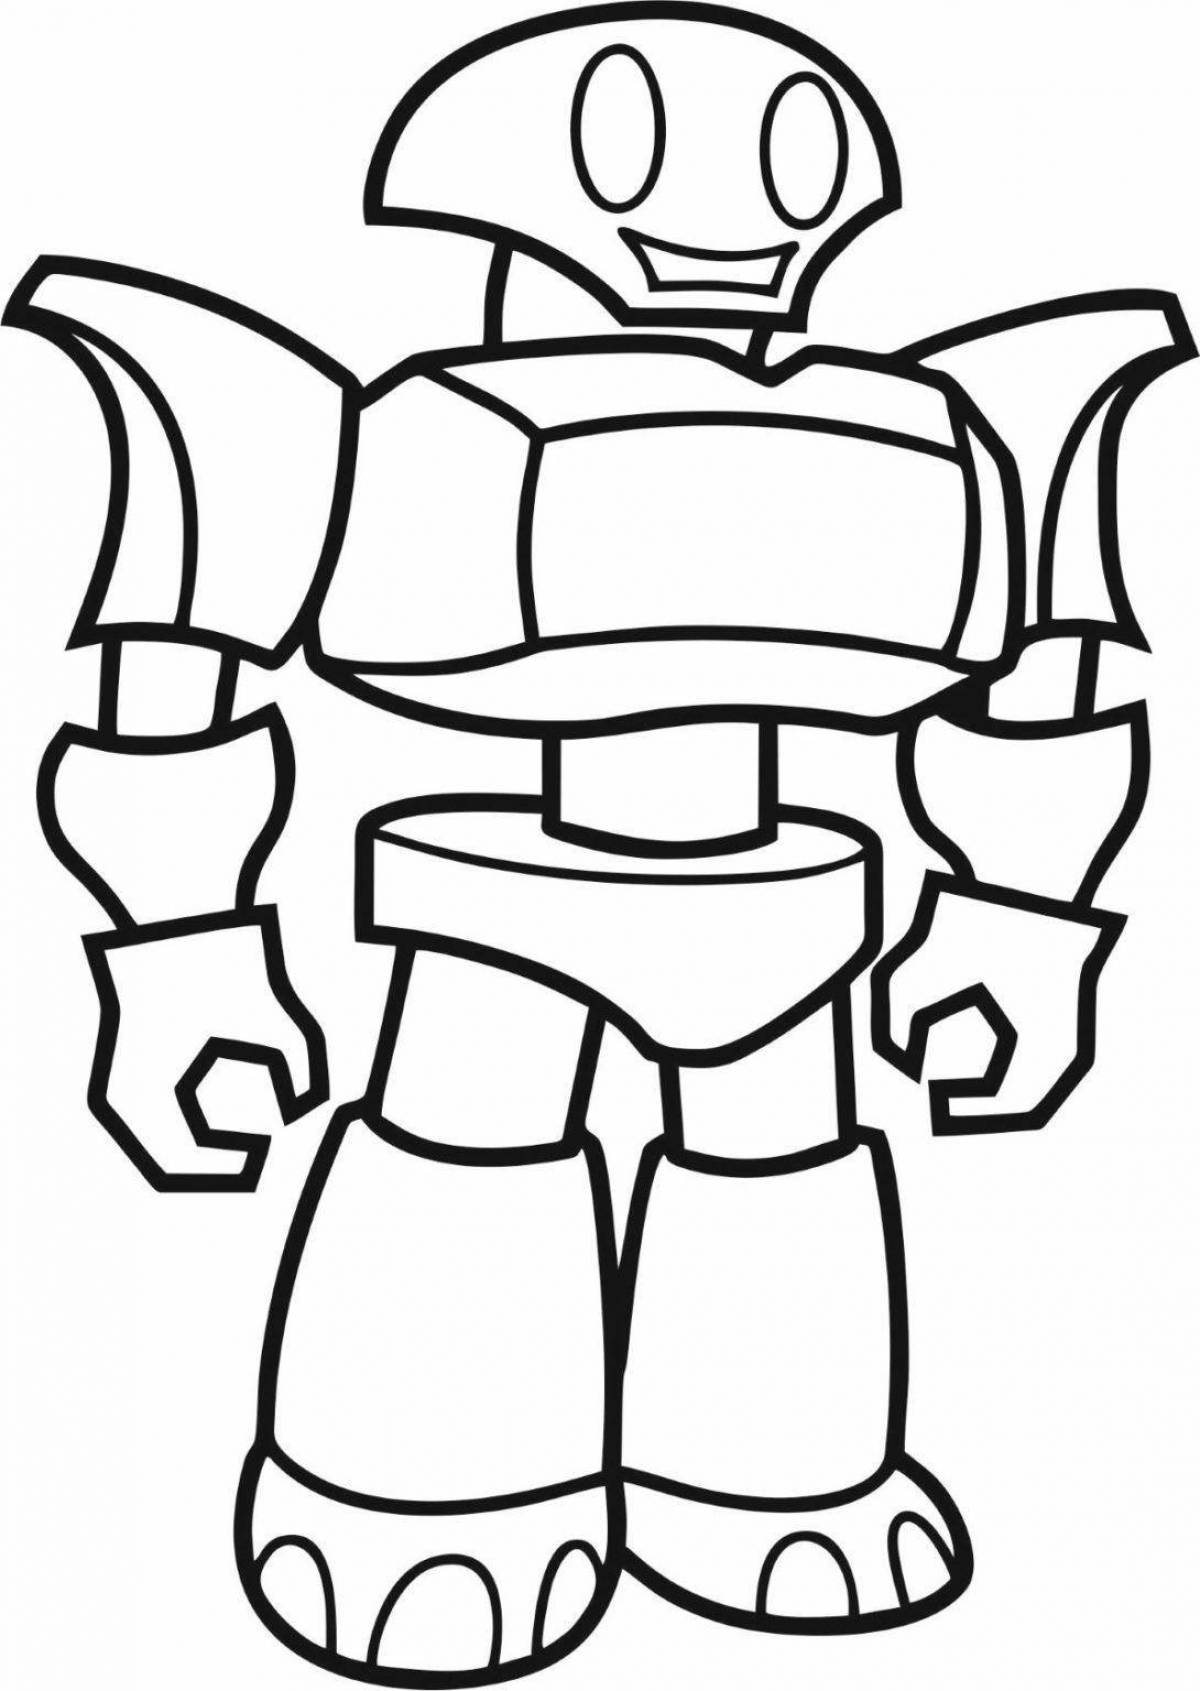 Glorious tobots coloring for kids